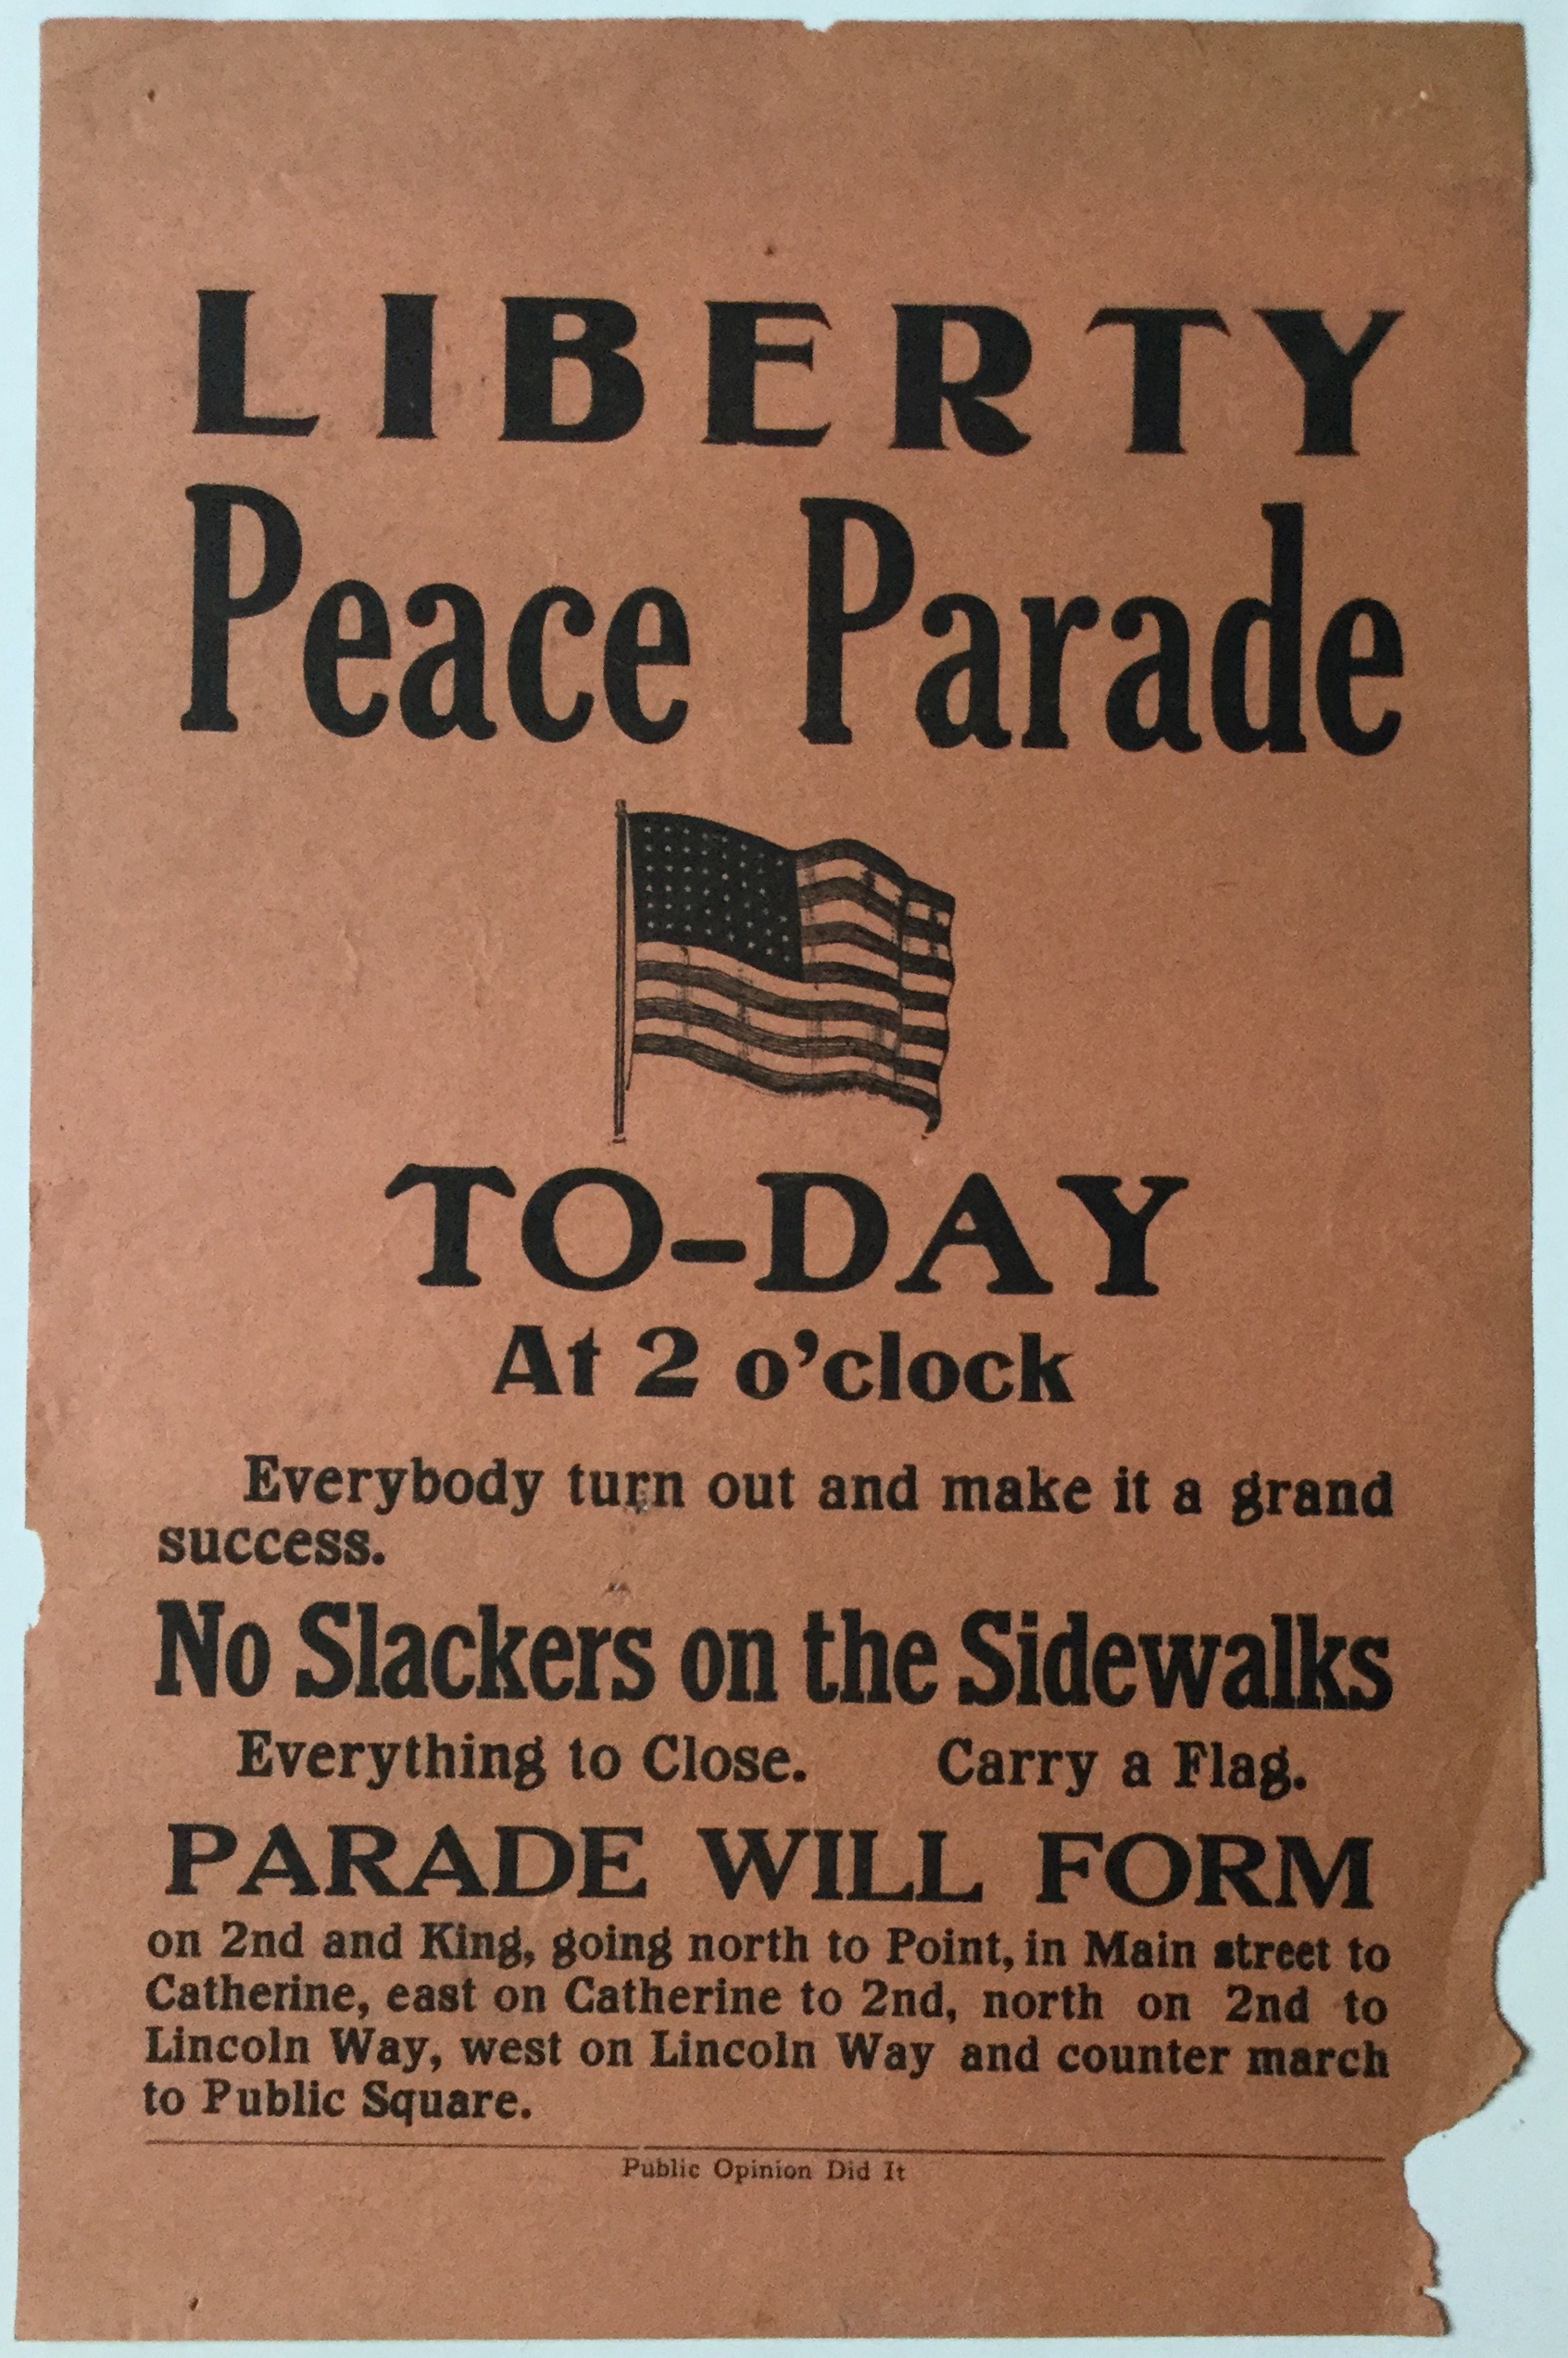 J484	LIBERTY PEACE PARADE TODAY AT 2:00 - NO SLACKERS ON THE SIDEWALKS - PARADE WILL FORM - EVERYTHING TO CLOSE - CARRY A FLAG